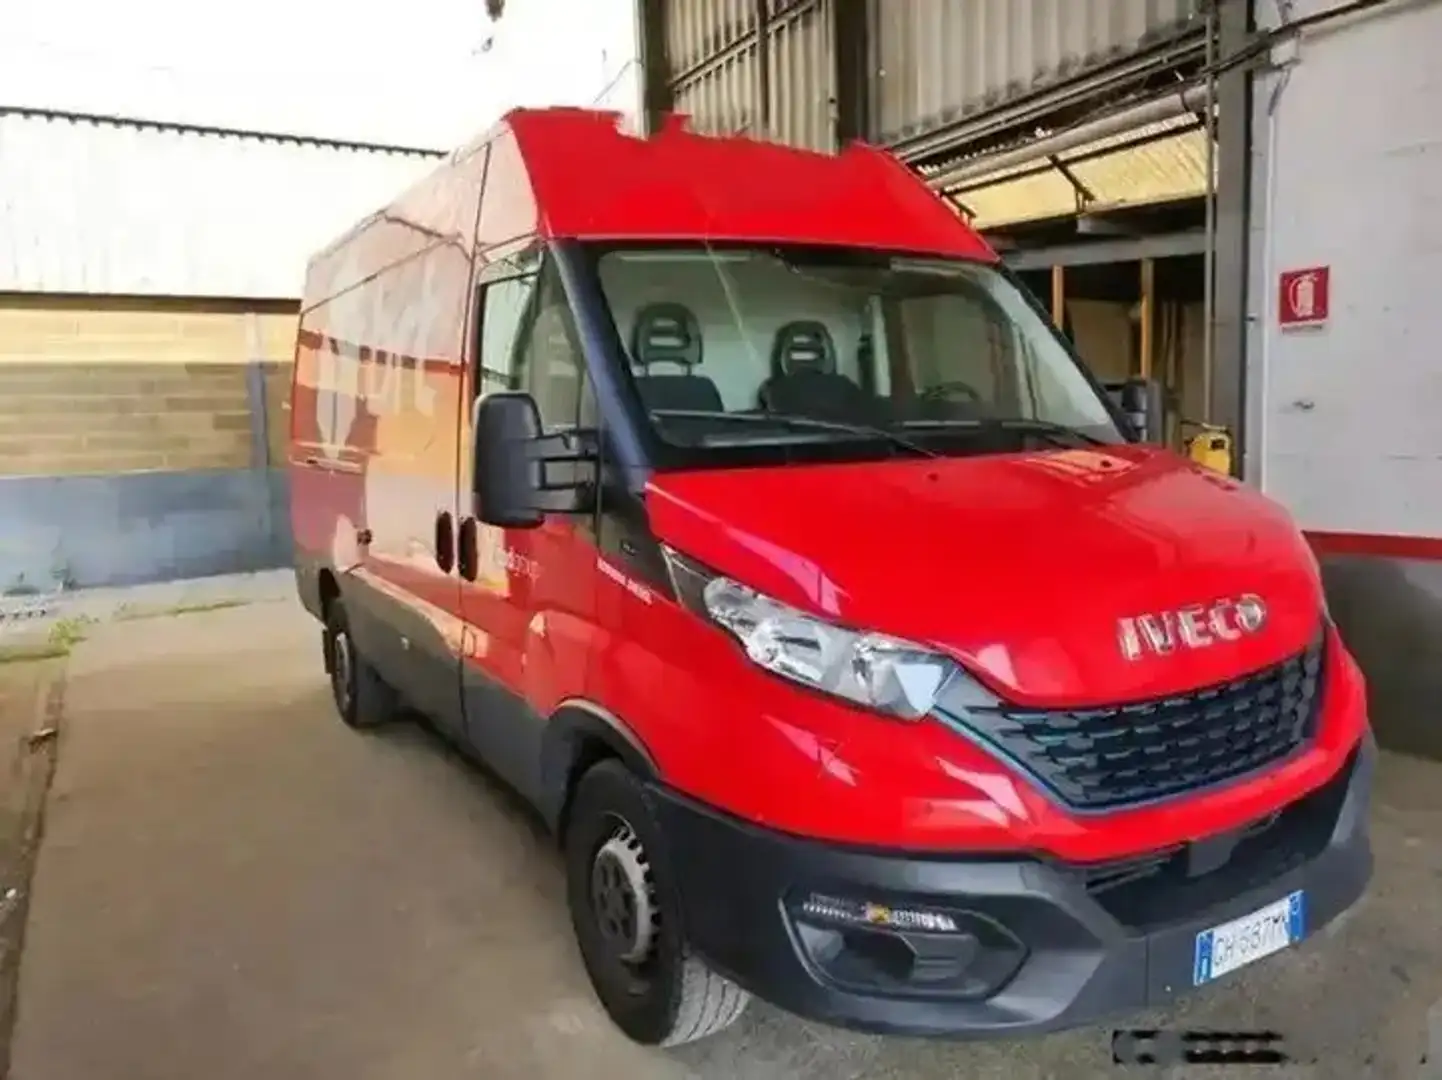 Iveco Daily 35S14NV 3.0 NATURAL POWER PM-SL-TM  TG : GH687MN Rojo - 2